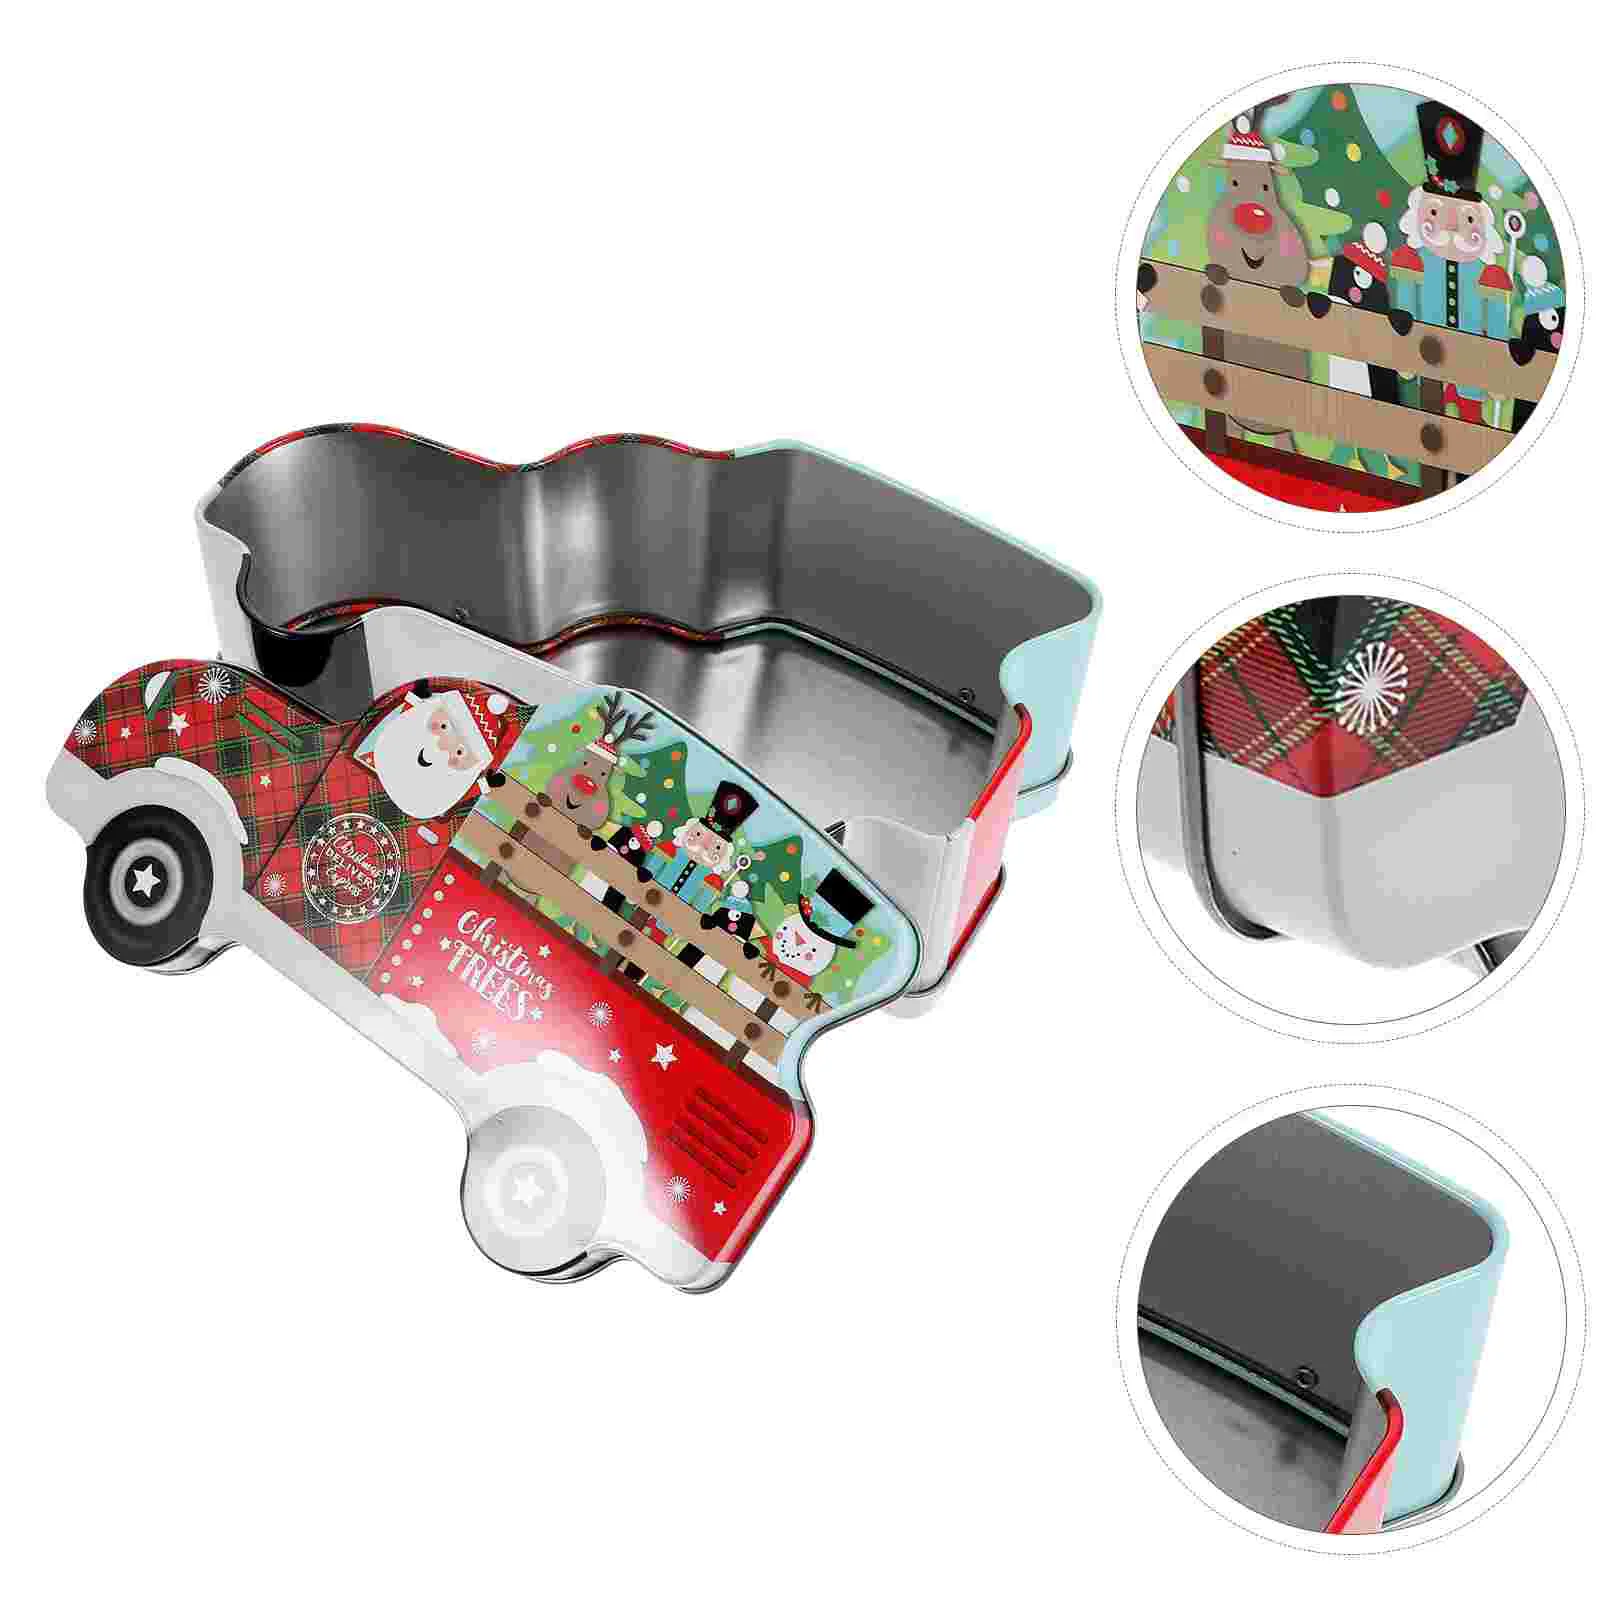 

Christmas Cookie Tins Candy Box Car Shape Biscuits Box Tinplate Cookie Containers Xmas Gift Treat Boxes Xmas Holiday